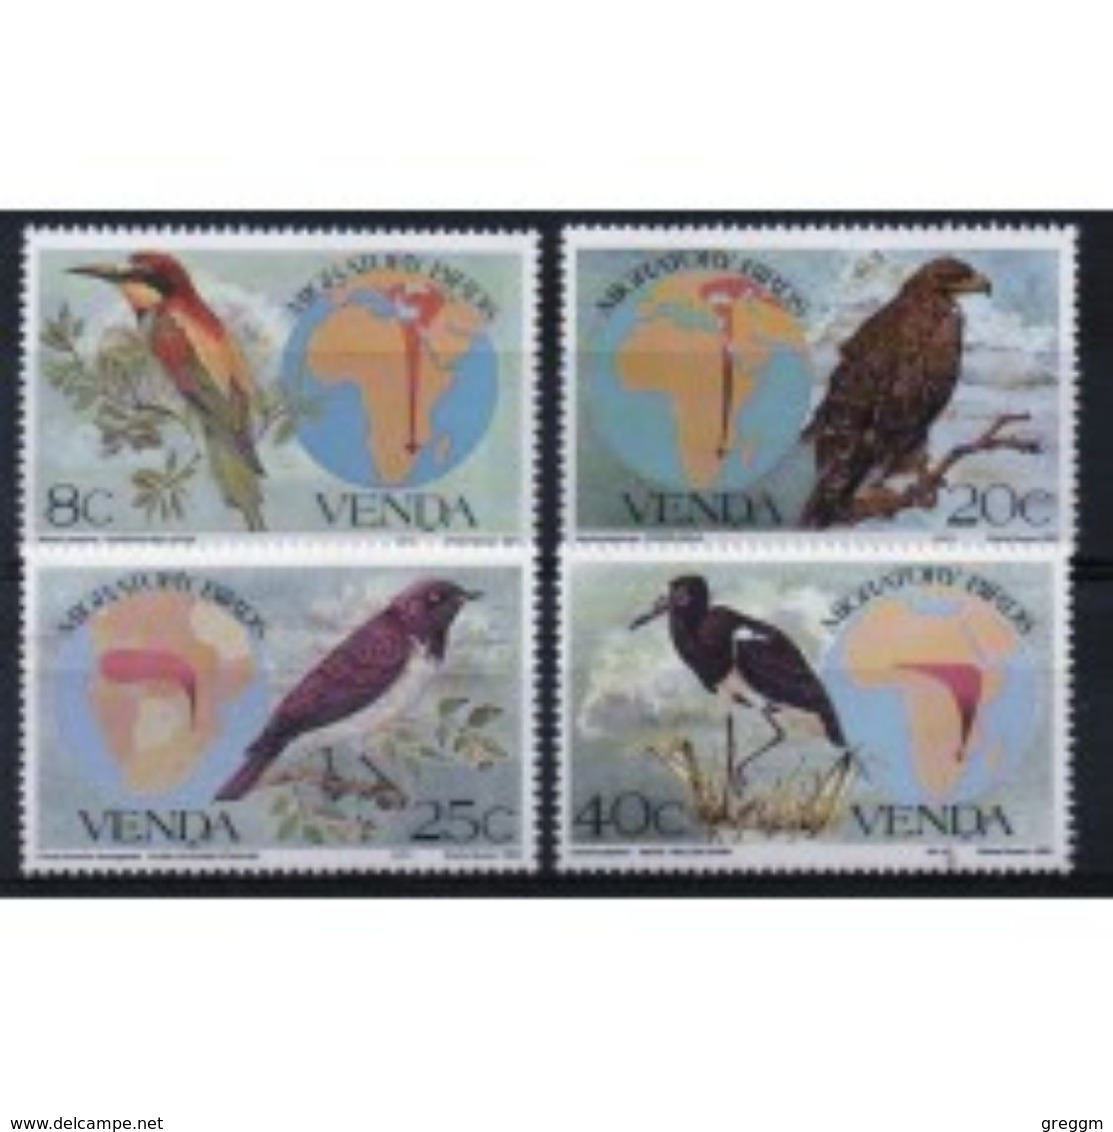 Venda Set Of Stamps Showing Birds  From 1983.  This Set  Is In Unmounted Mint Condition. - Venda